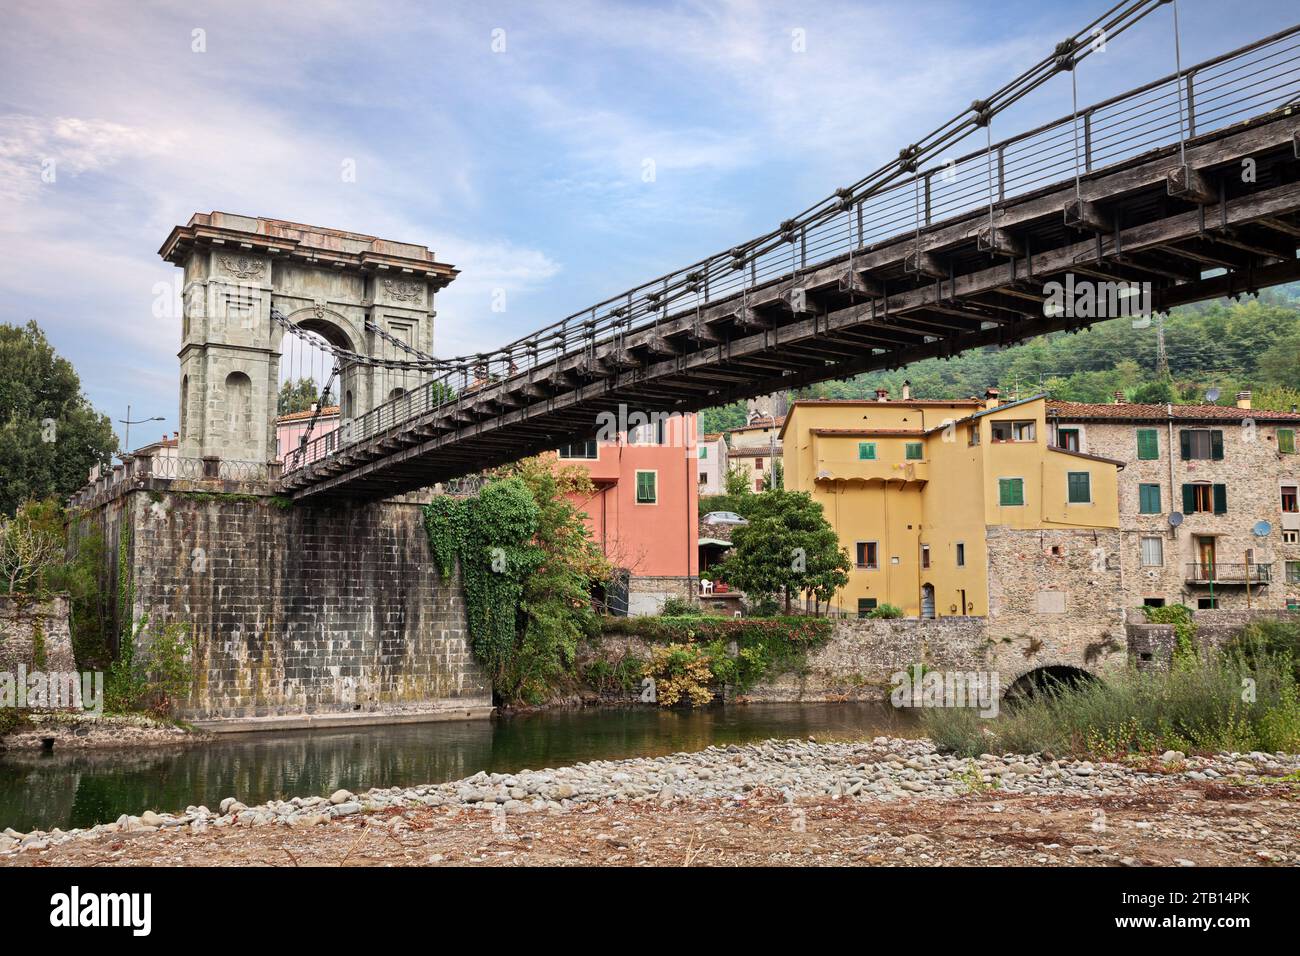 Bagni di Lucca, Tuscany. Italy: the Bridge of Chains, 19th-century suspension bridge over the river Lima that links Fornoli and Chifenti villages Stock Photo